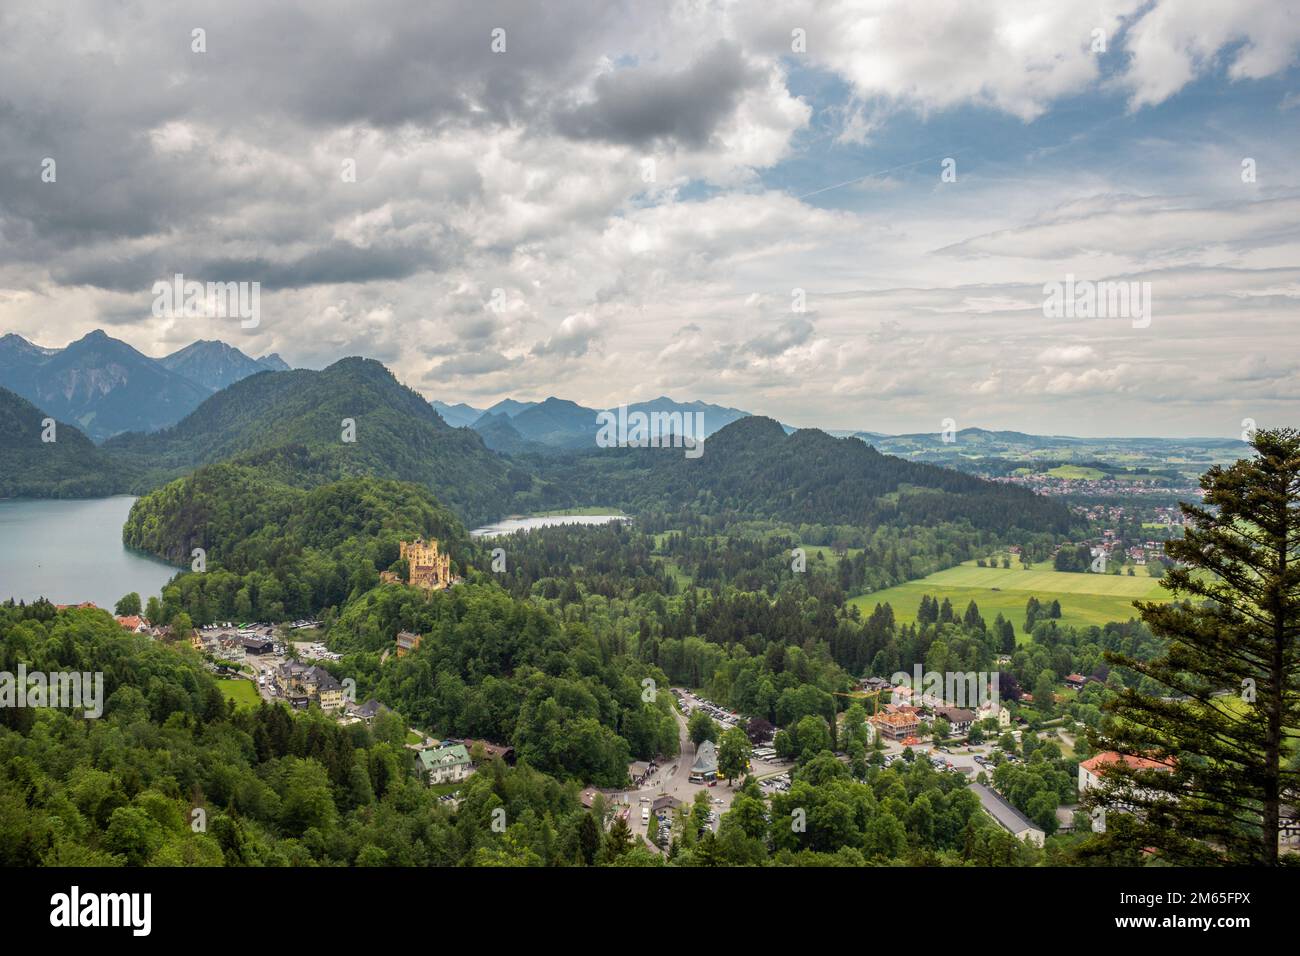 View of Hohenschwangau Castle, a 19th century palace and Alpsee lake located in the German town of Hohenschwangau, near the city of Füssen, Germany. Stock Photo